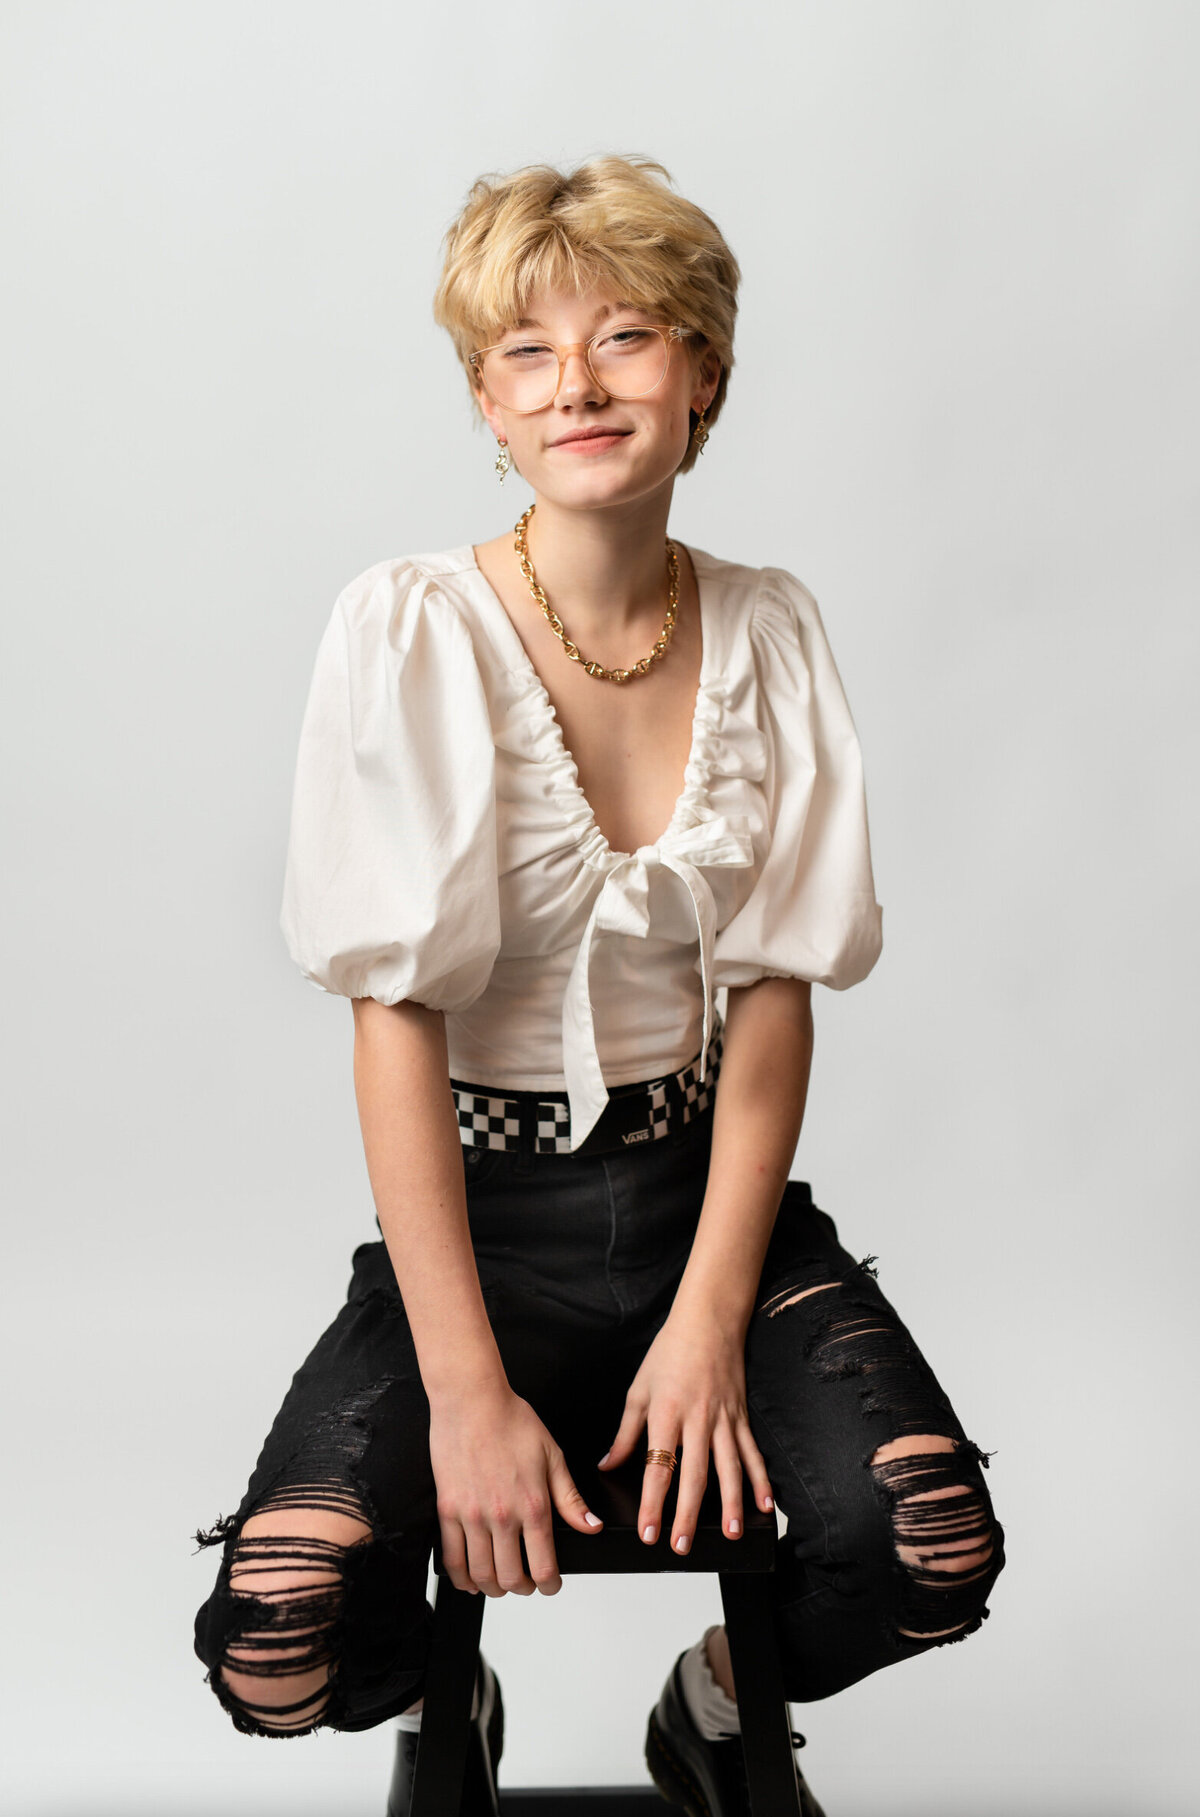 Model posing on a stool wearing black jeans and a white top in front of a white backdrop at a New Jersey headshot studio